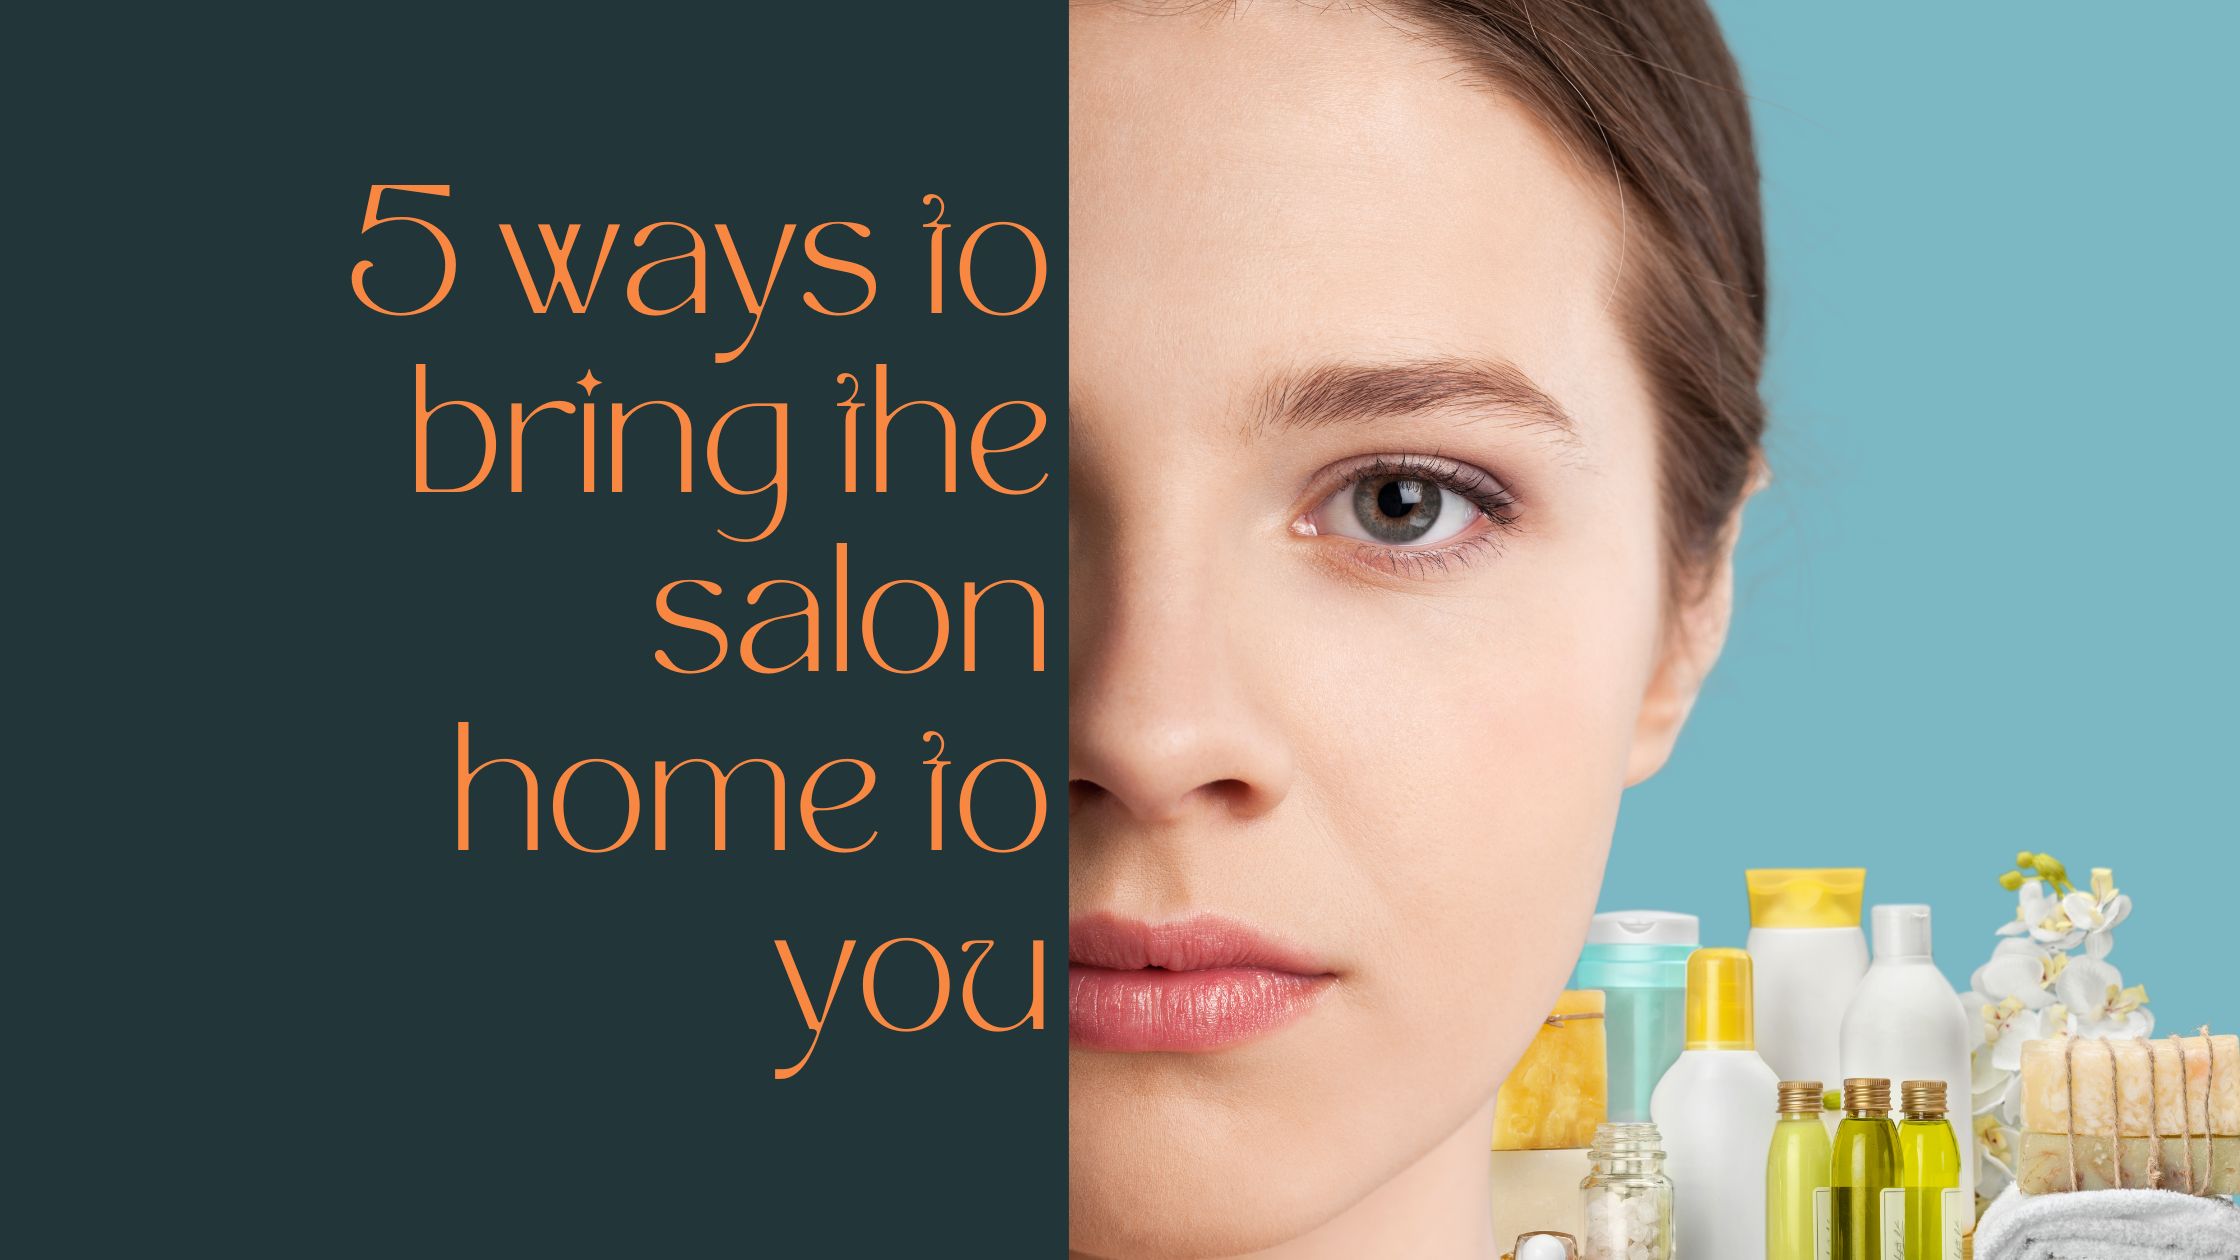 5 ways to bring the salon home to you